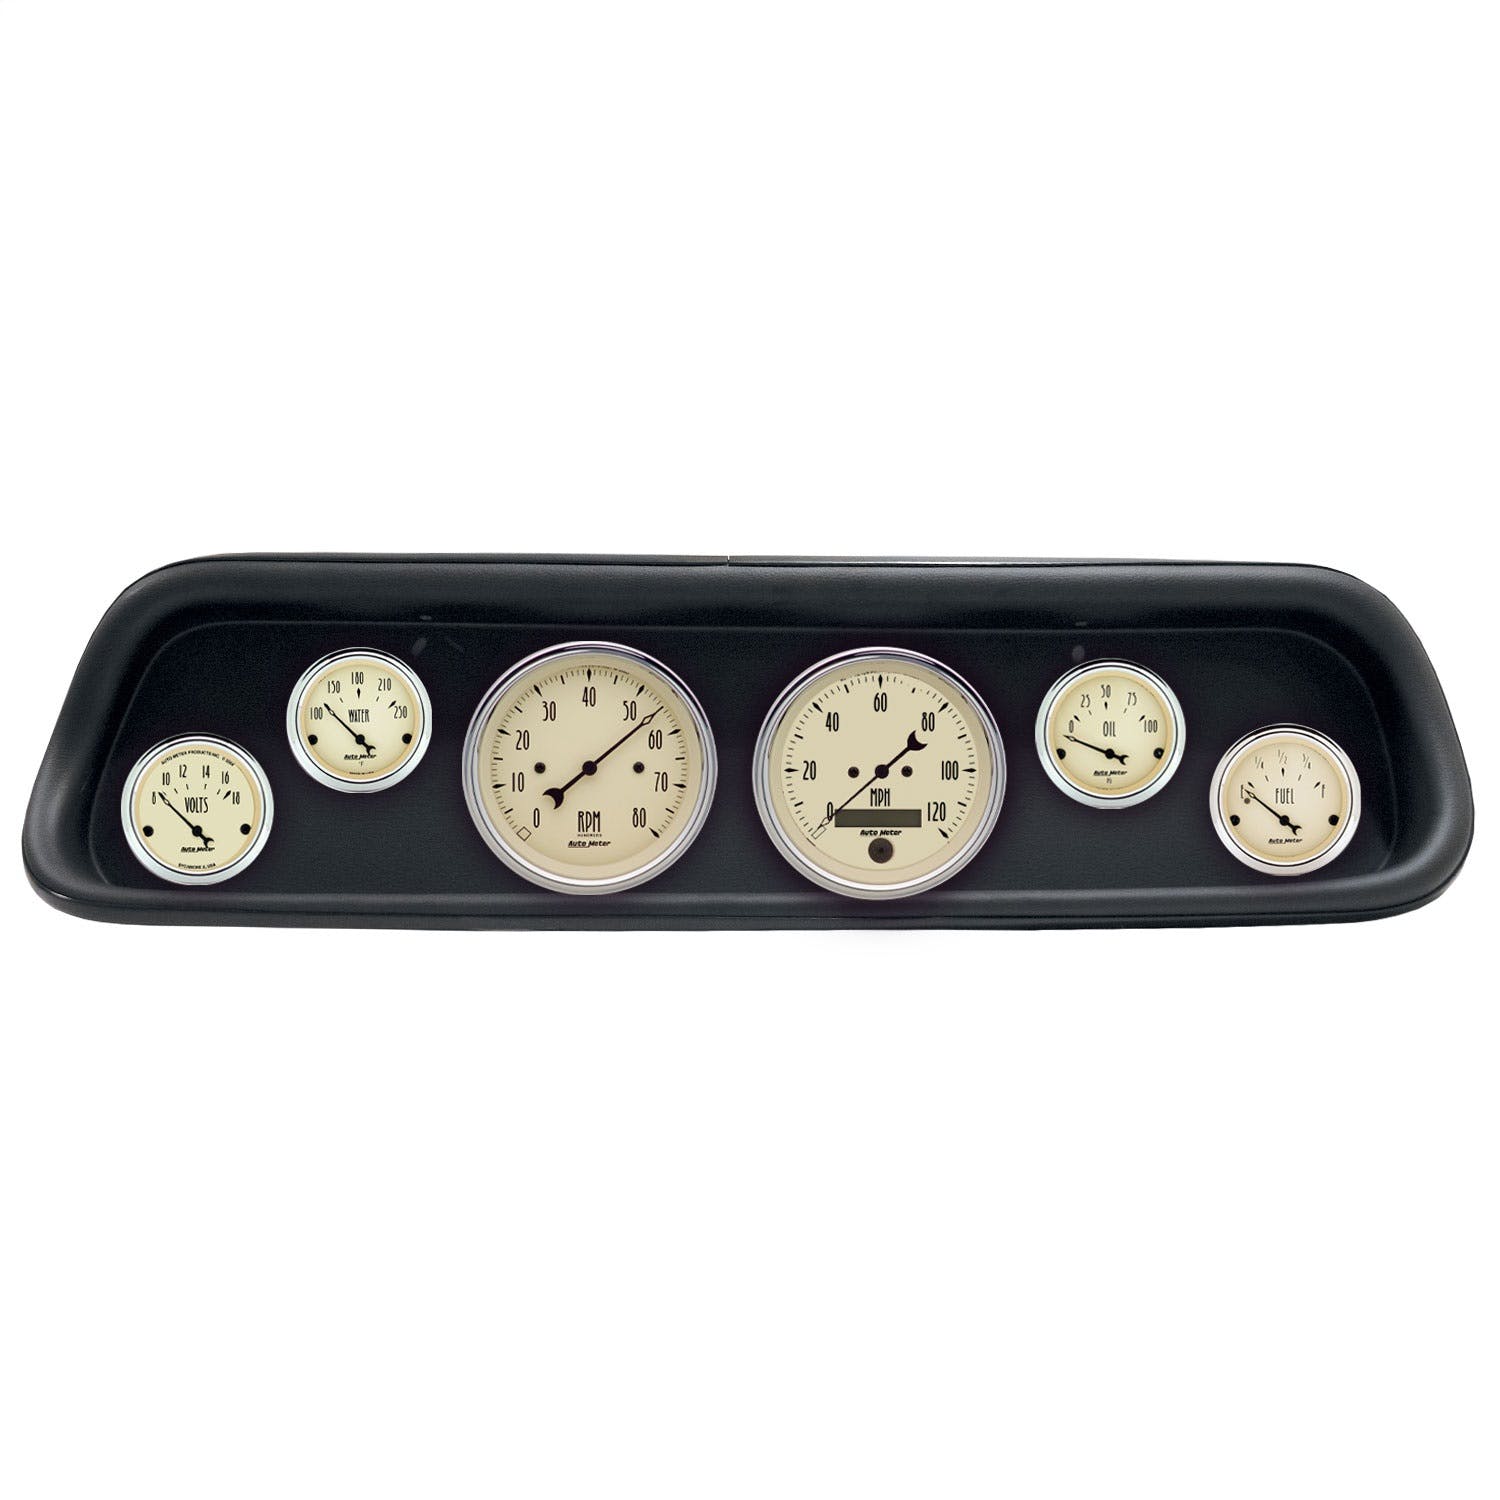 AutoMeter Products 2107-02 6 Gauge Direct-Fit Dash Kit, Ford Mustang 64-65, Antique Beige